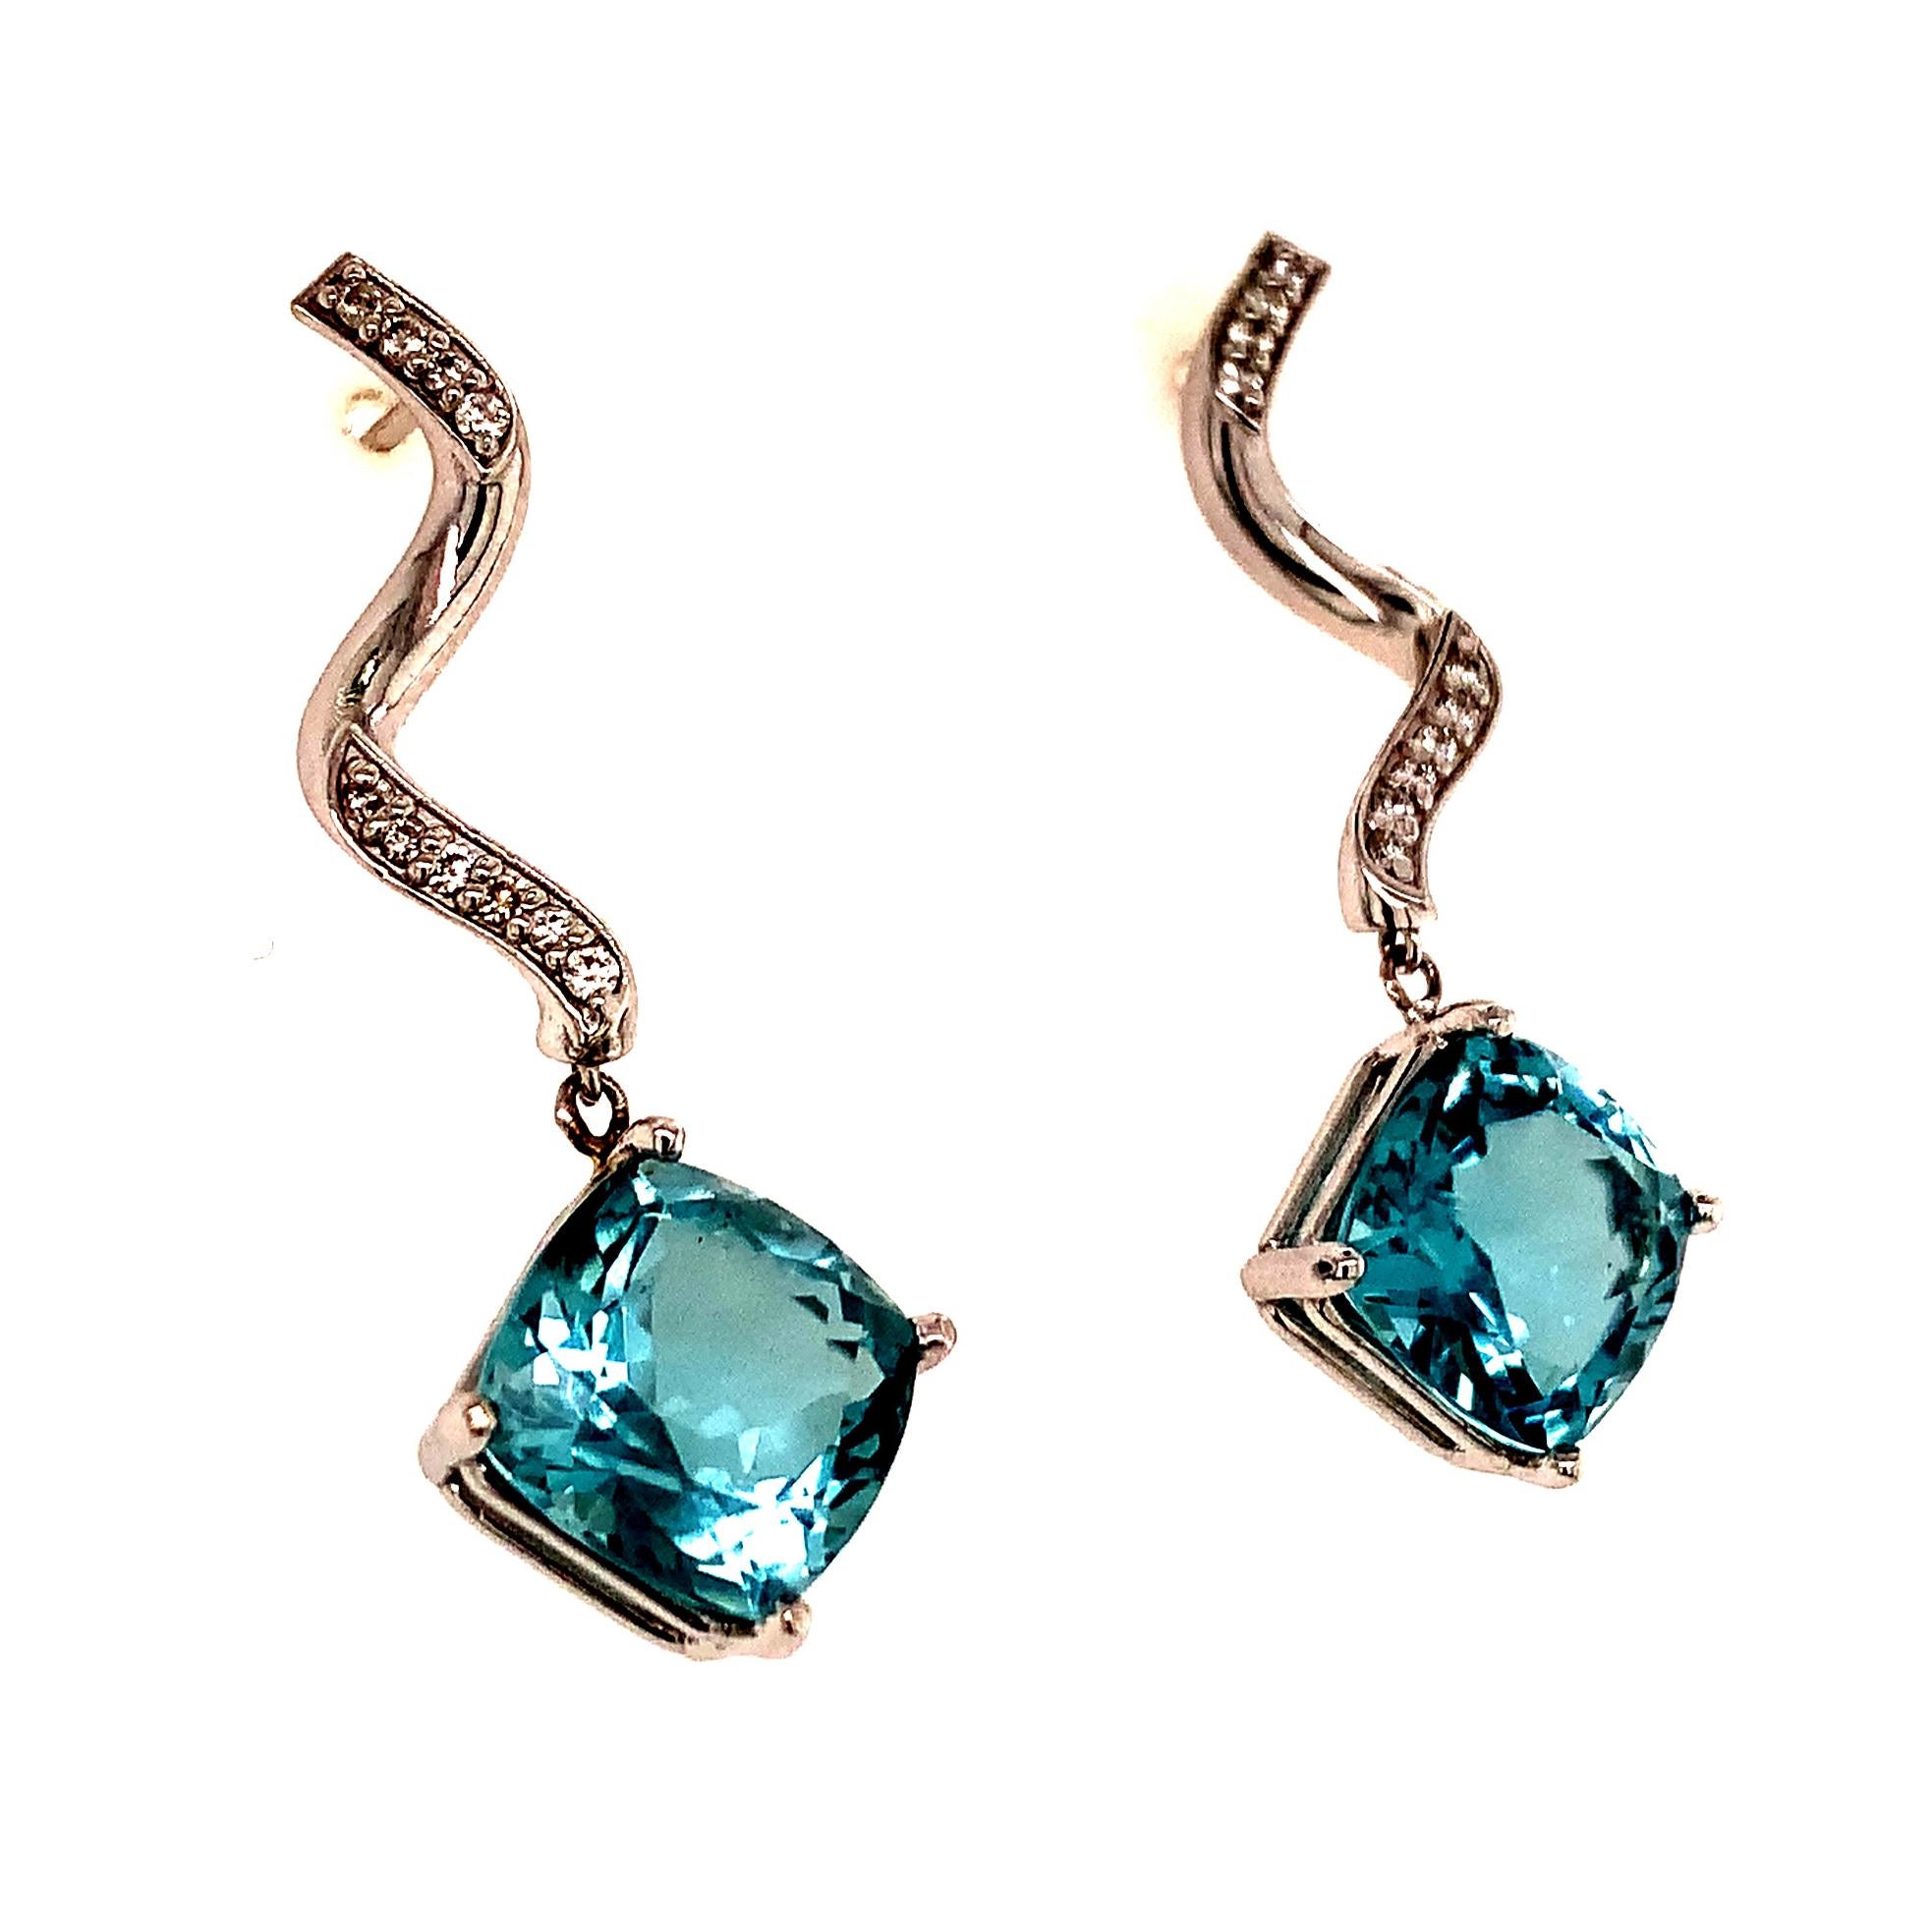 Natural Finely Faceted Quality Aquamarine Diamond Earrings 14k Gold 8.15 TCW Certified $4,950 111528

This is a Unique Custom Made Glamorous Piece of Jewelry!

Nothing says, “I Love you” more than Diamonds and Pearls!

This pair of Aquamarine